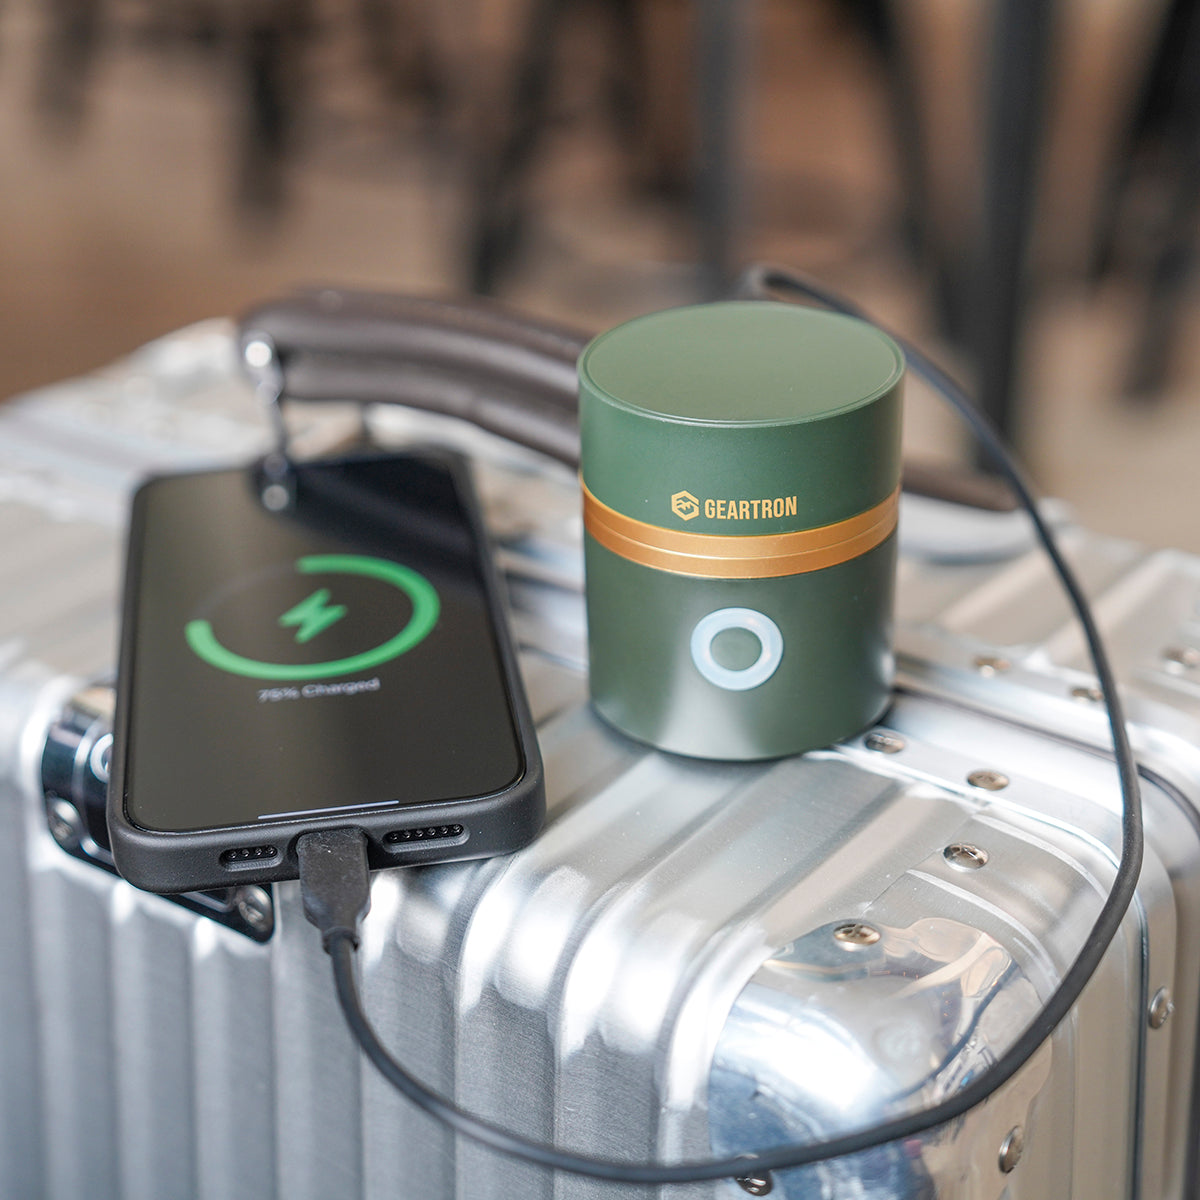 Geartron Plug&Go power bank is an alternative back up source for outdoor adventures, allowing you to keep your electronic devices charged in emergency.